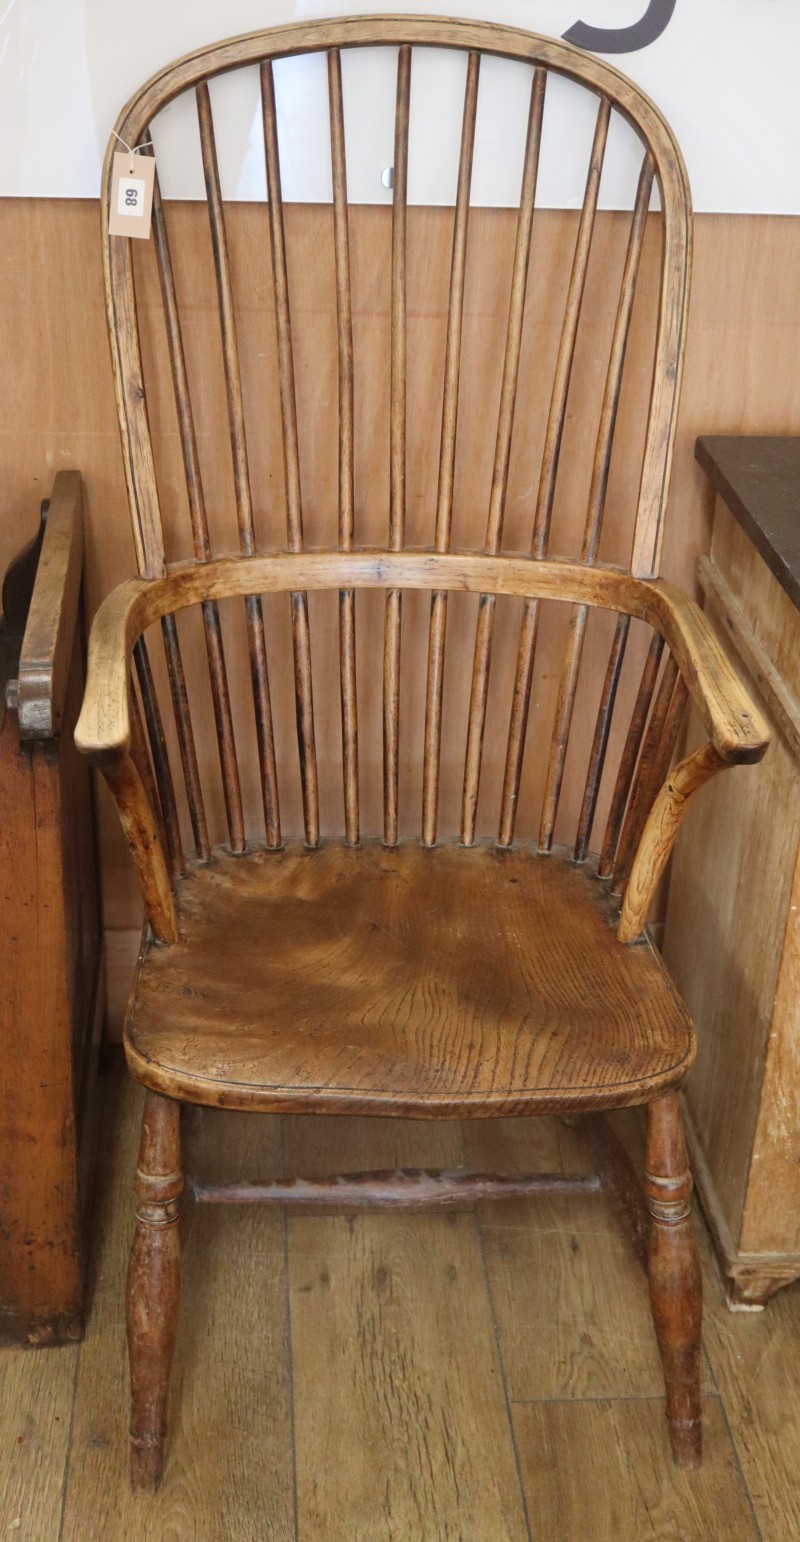 A 19th century ash and elm Windsor comb back armchair